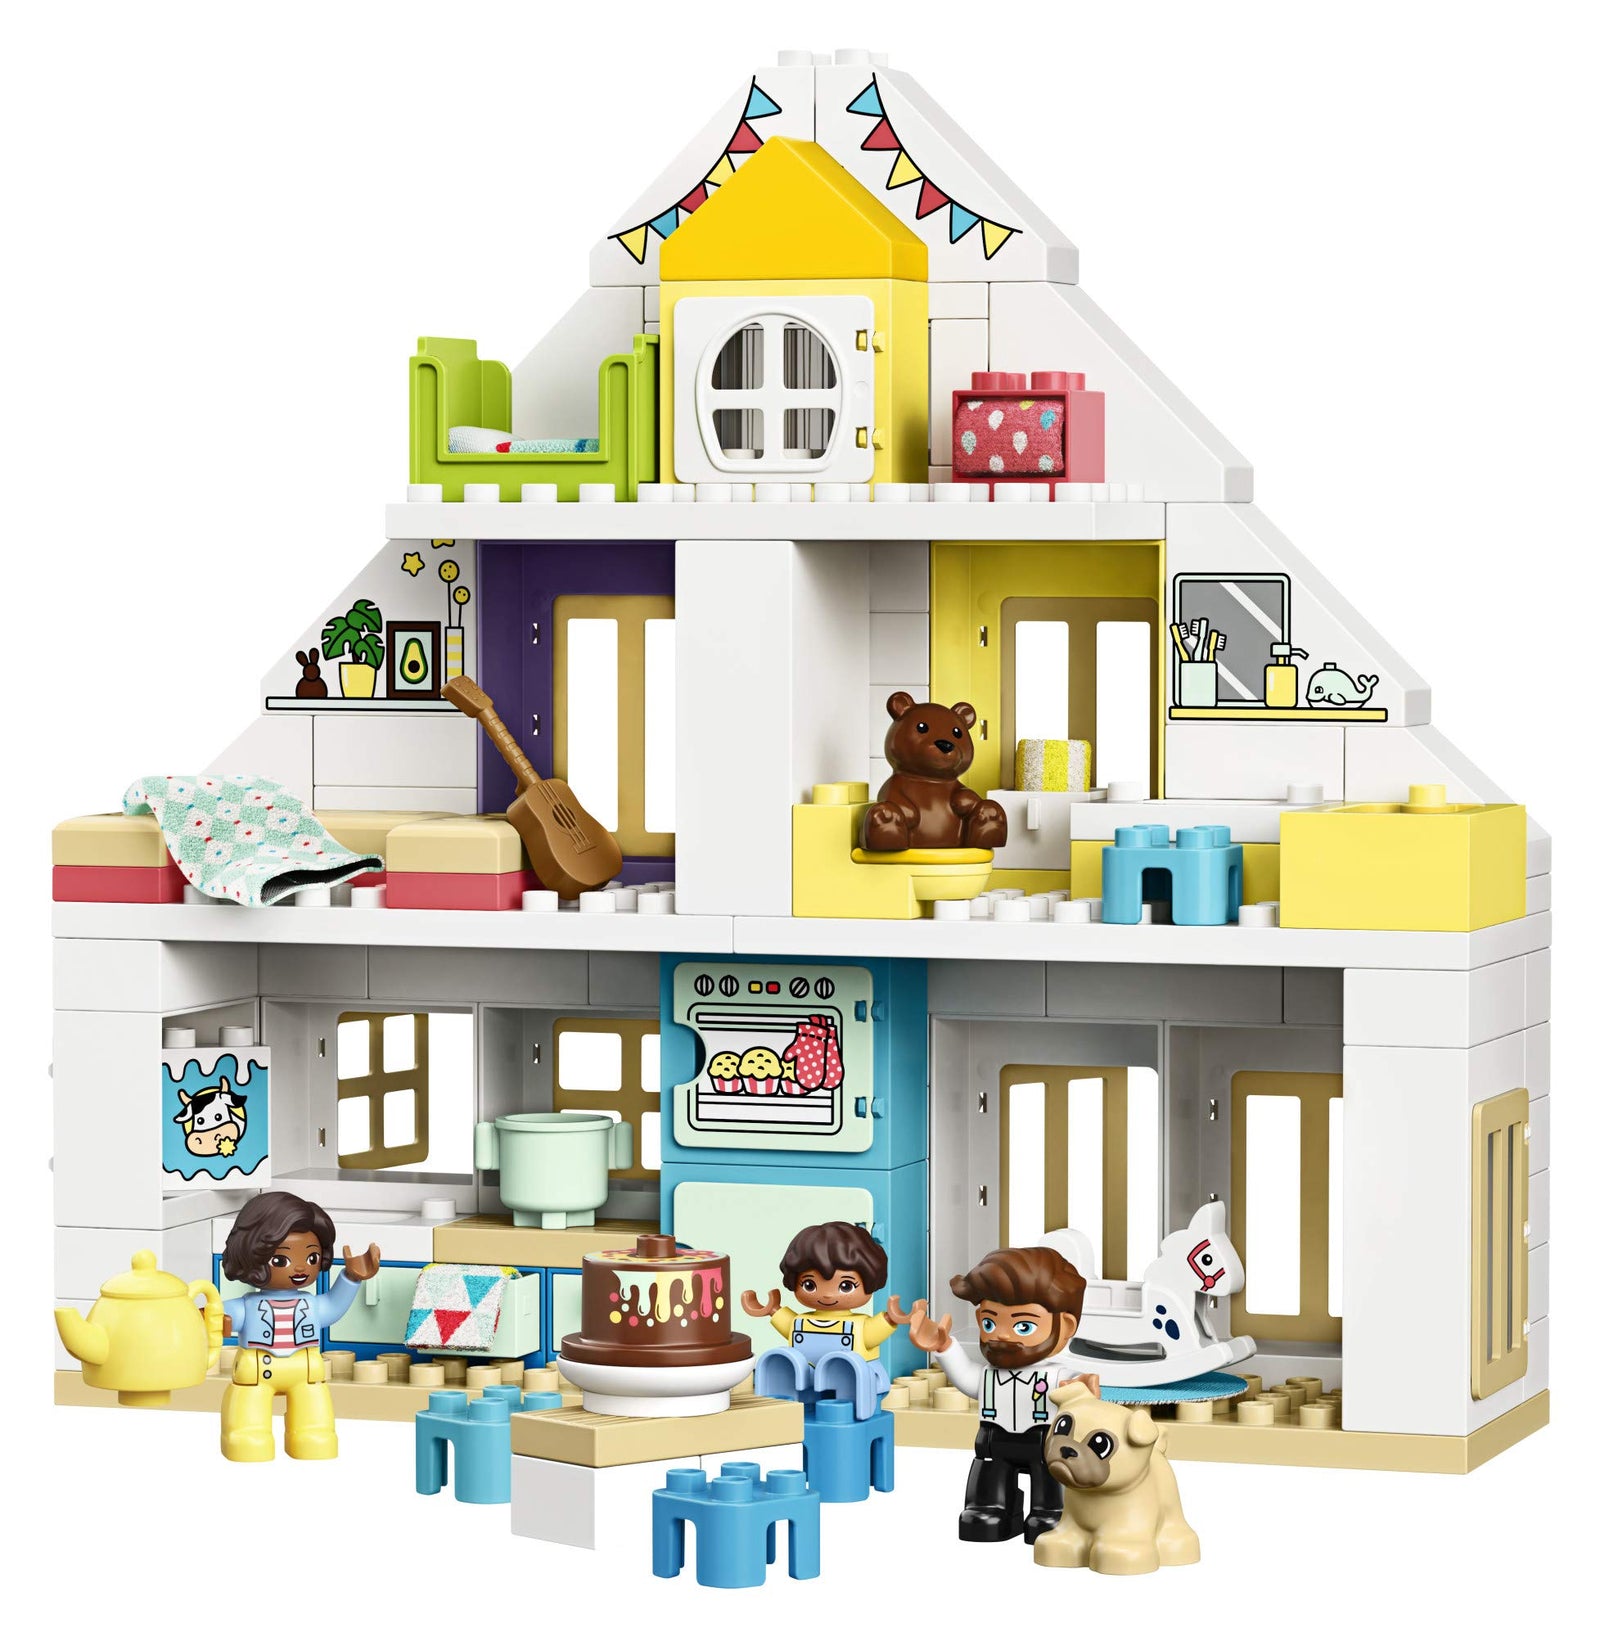 LEGO DUPLO Town Modular Playhouse 10929 Dollhouse with Furniture and a Family, Great Educational Toy for Toddlers (130 Pieces)